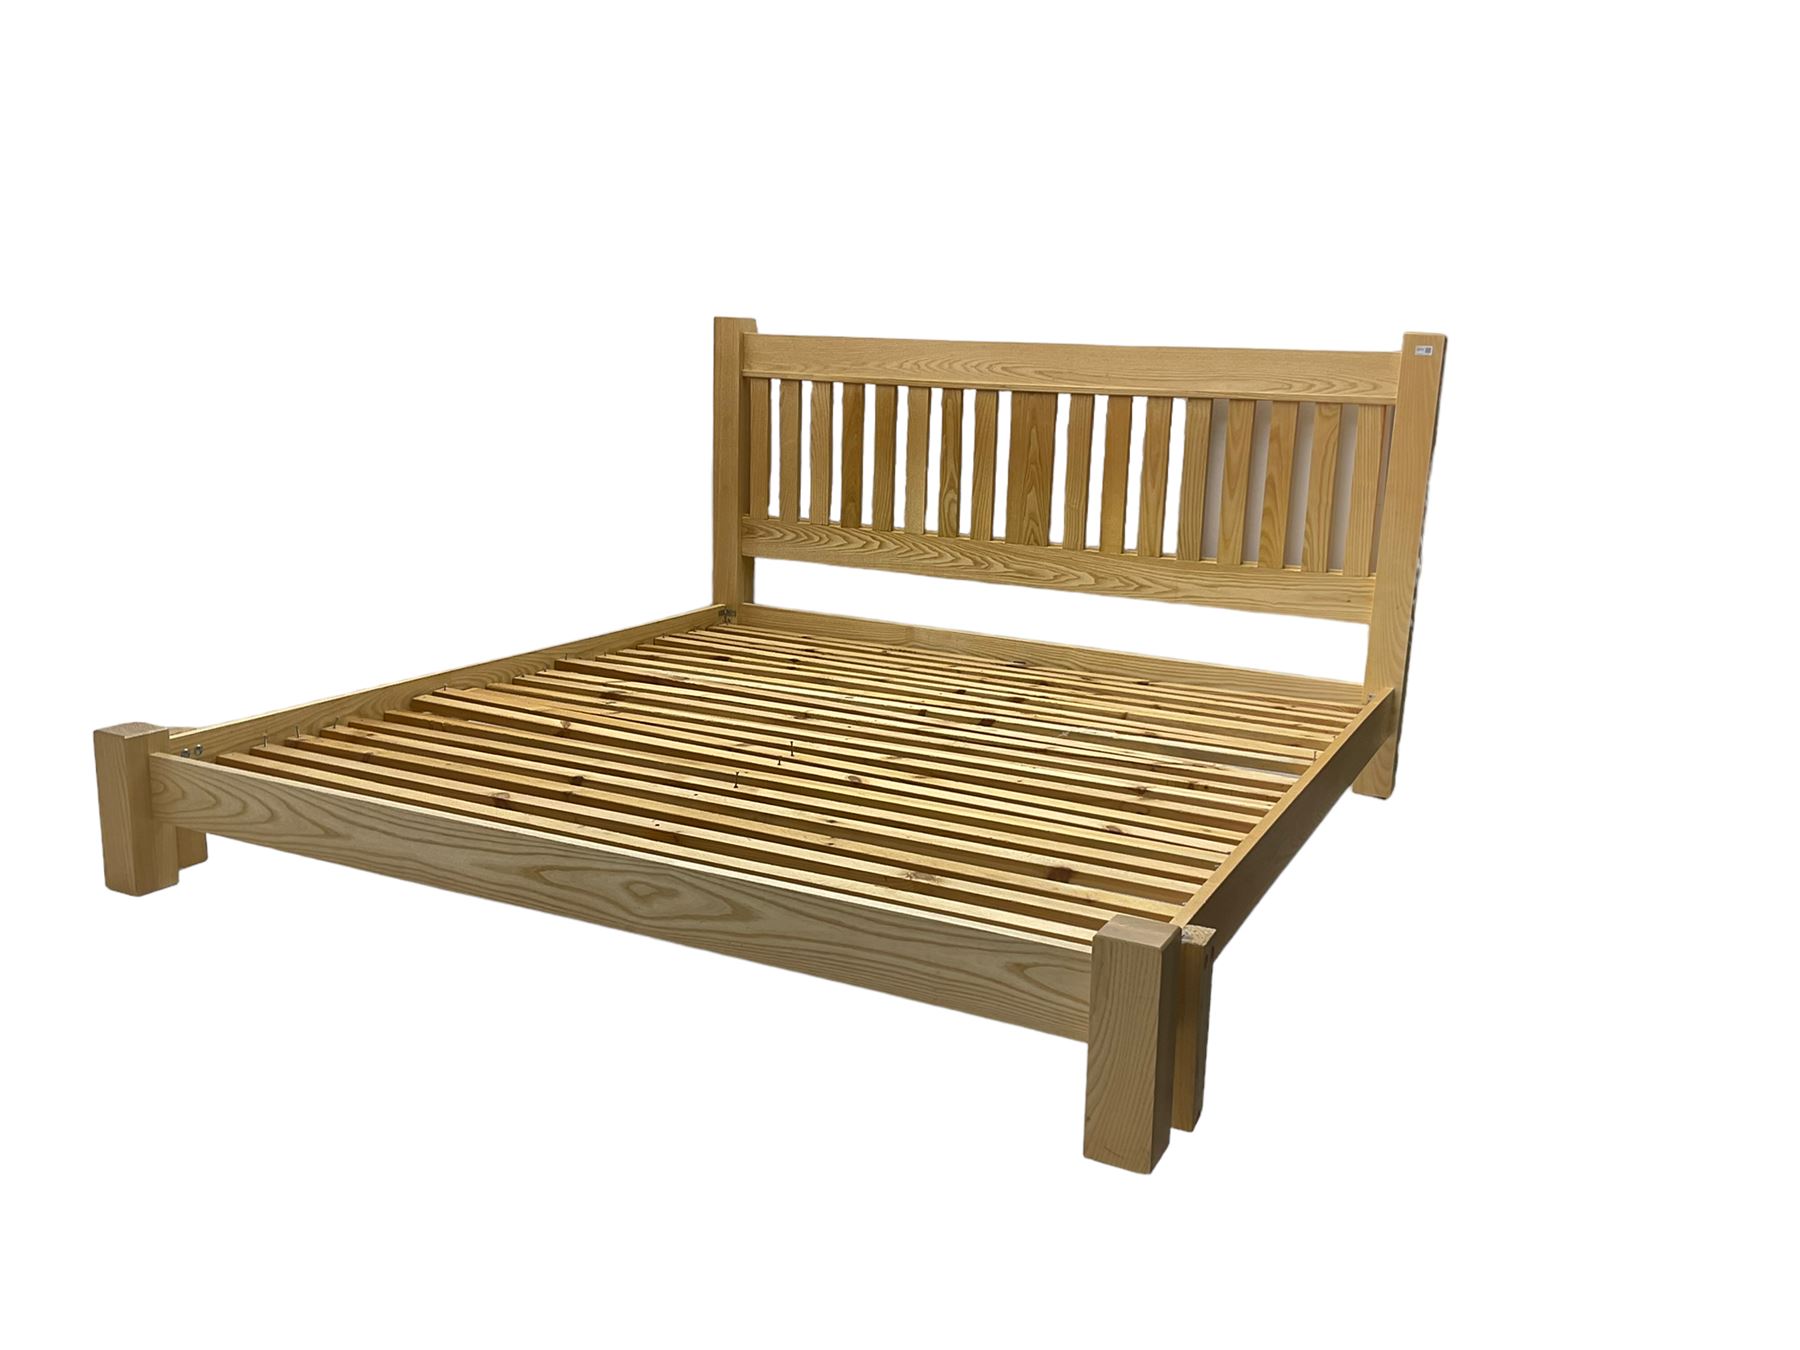 Light ash framed double bedstead (without mattress) - Image 2 of 4